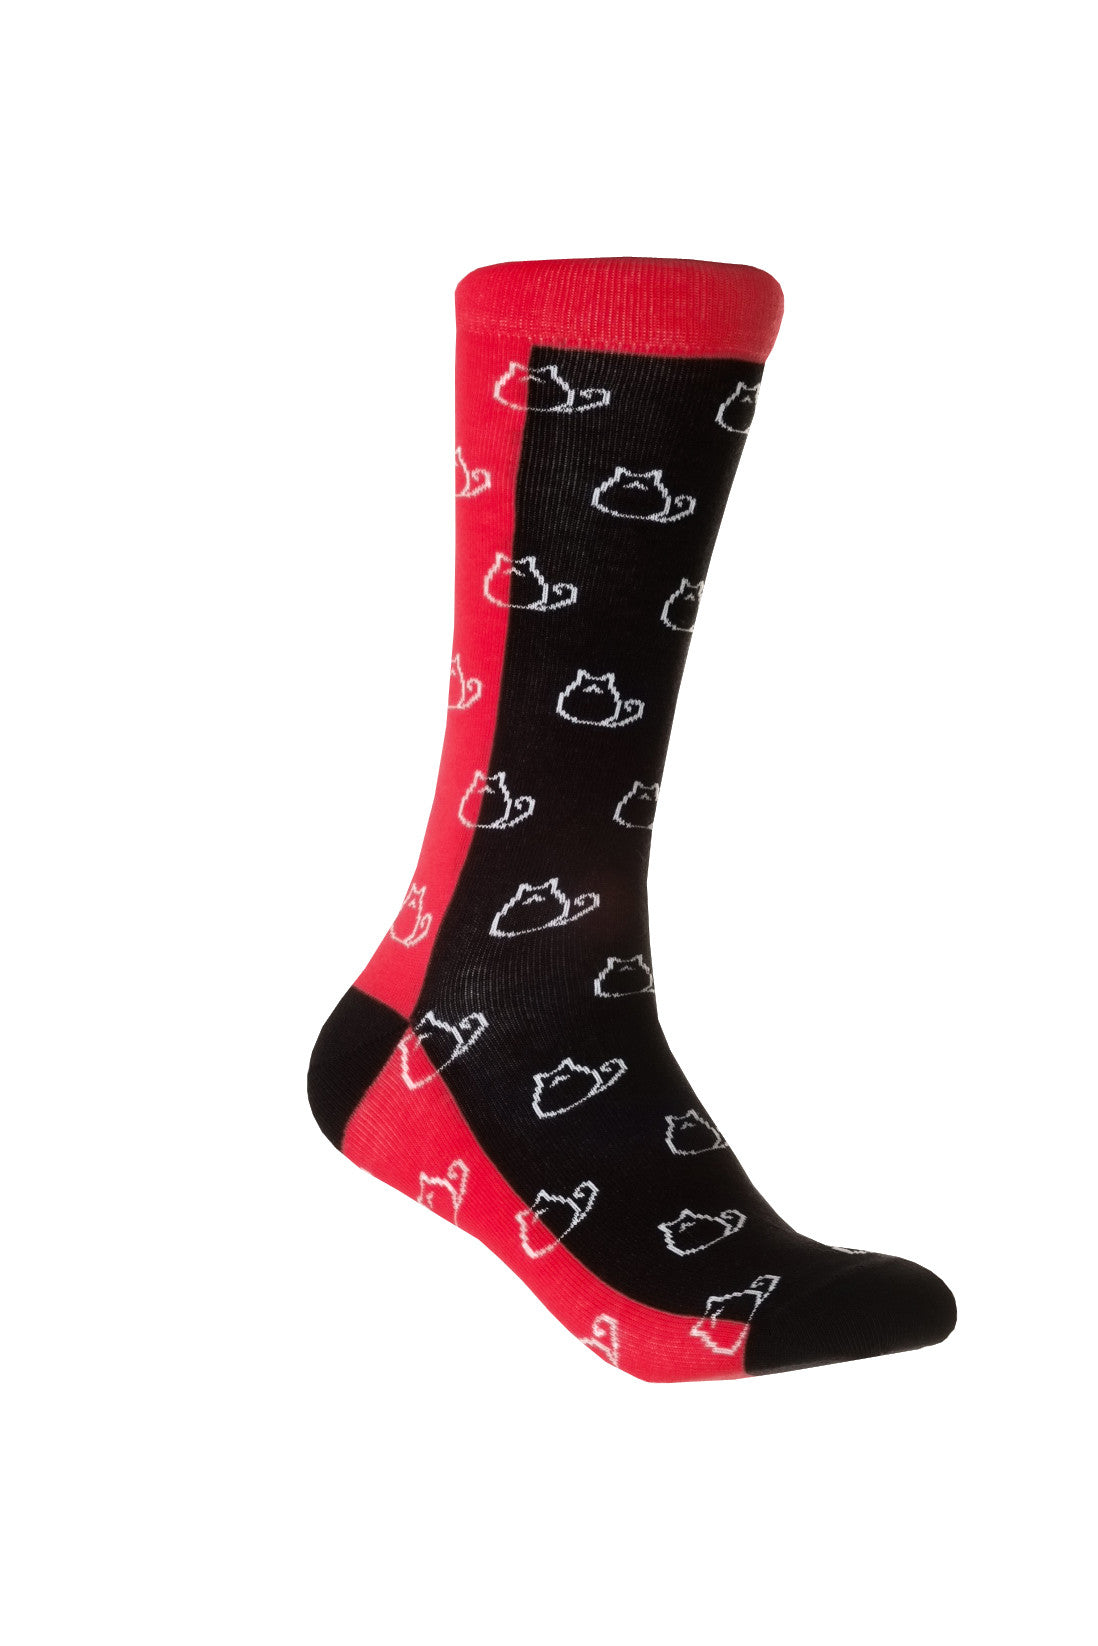 Giraffe Cool | Black Red and White Cats Brushed Cotton Socks Foot Front